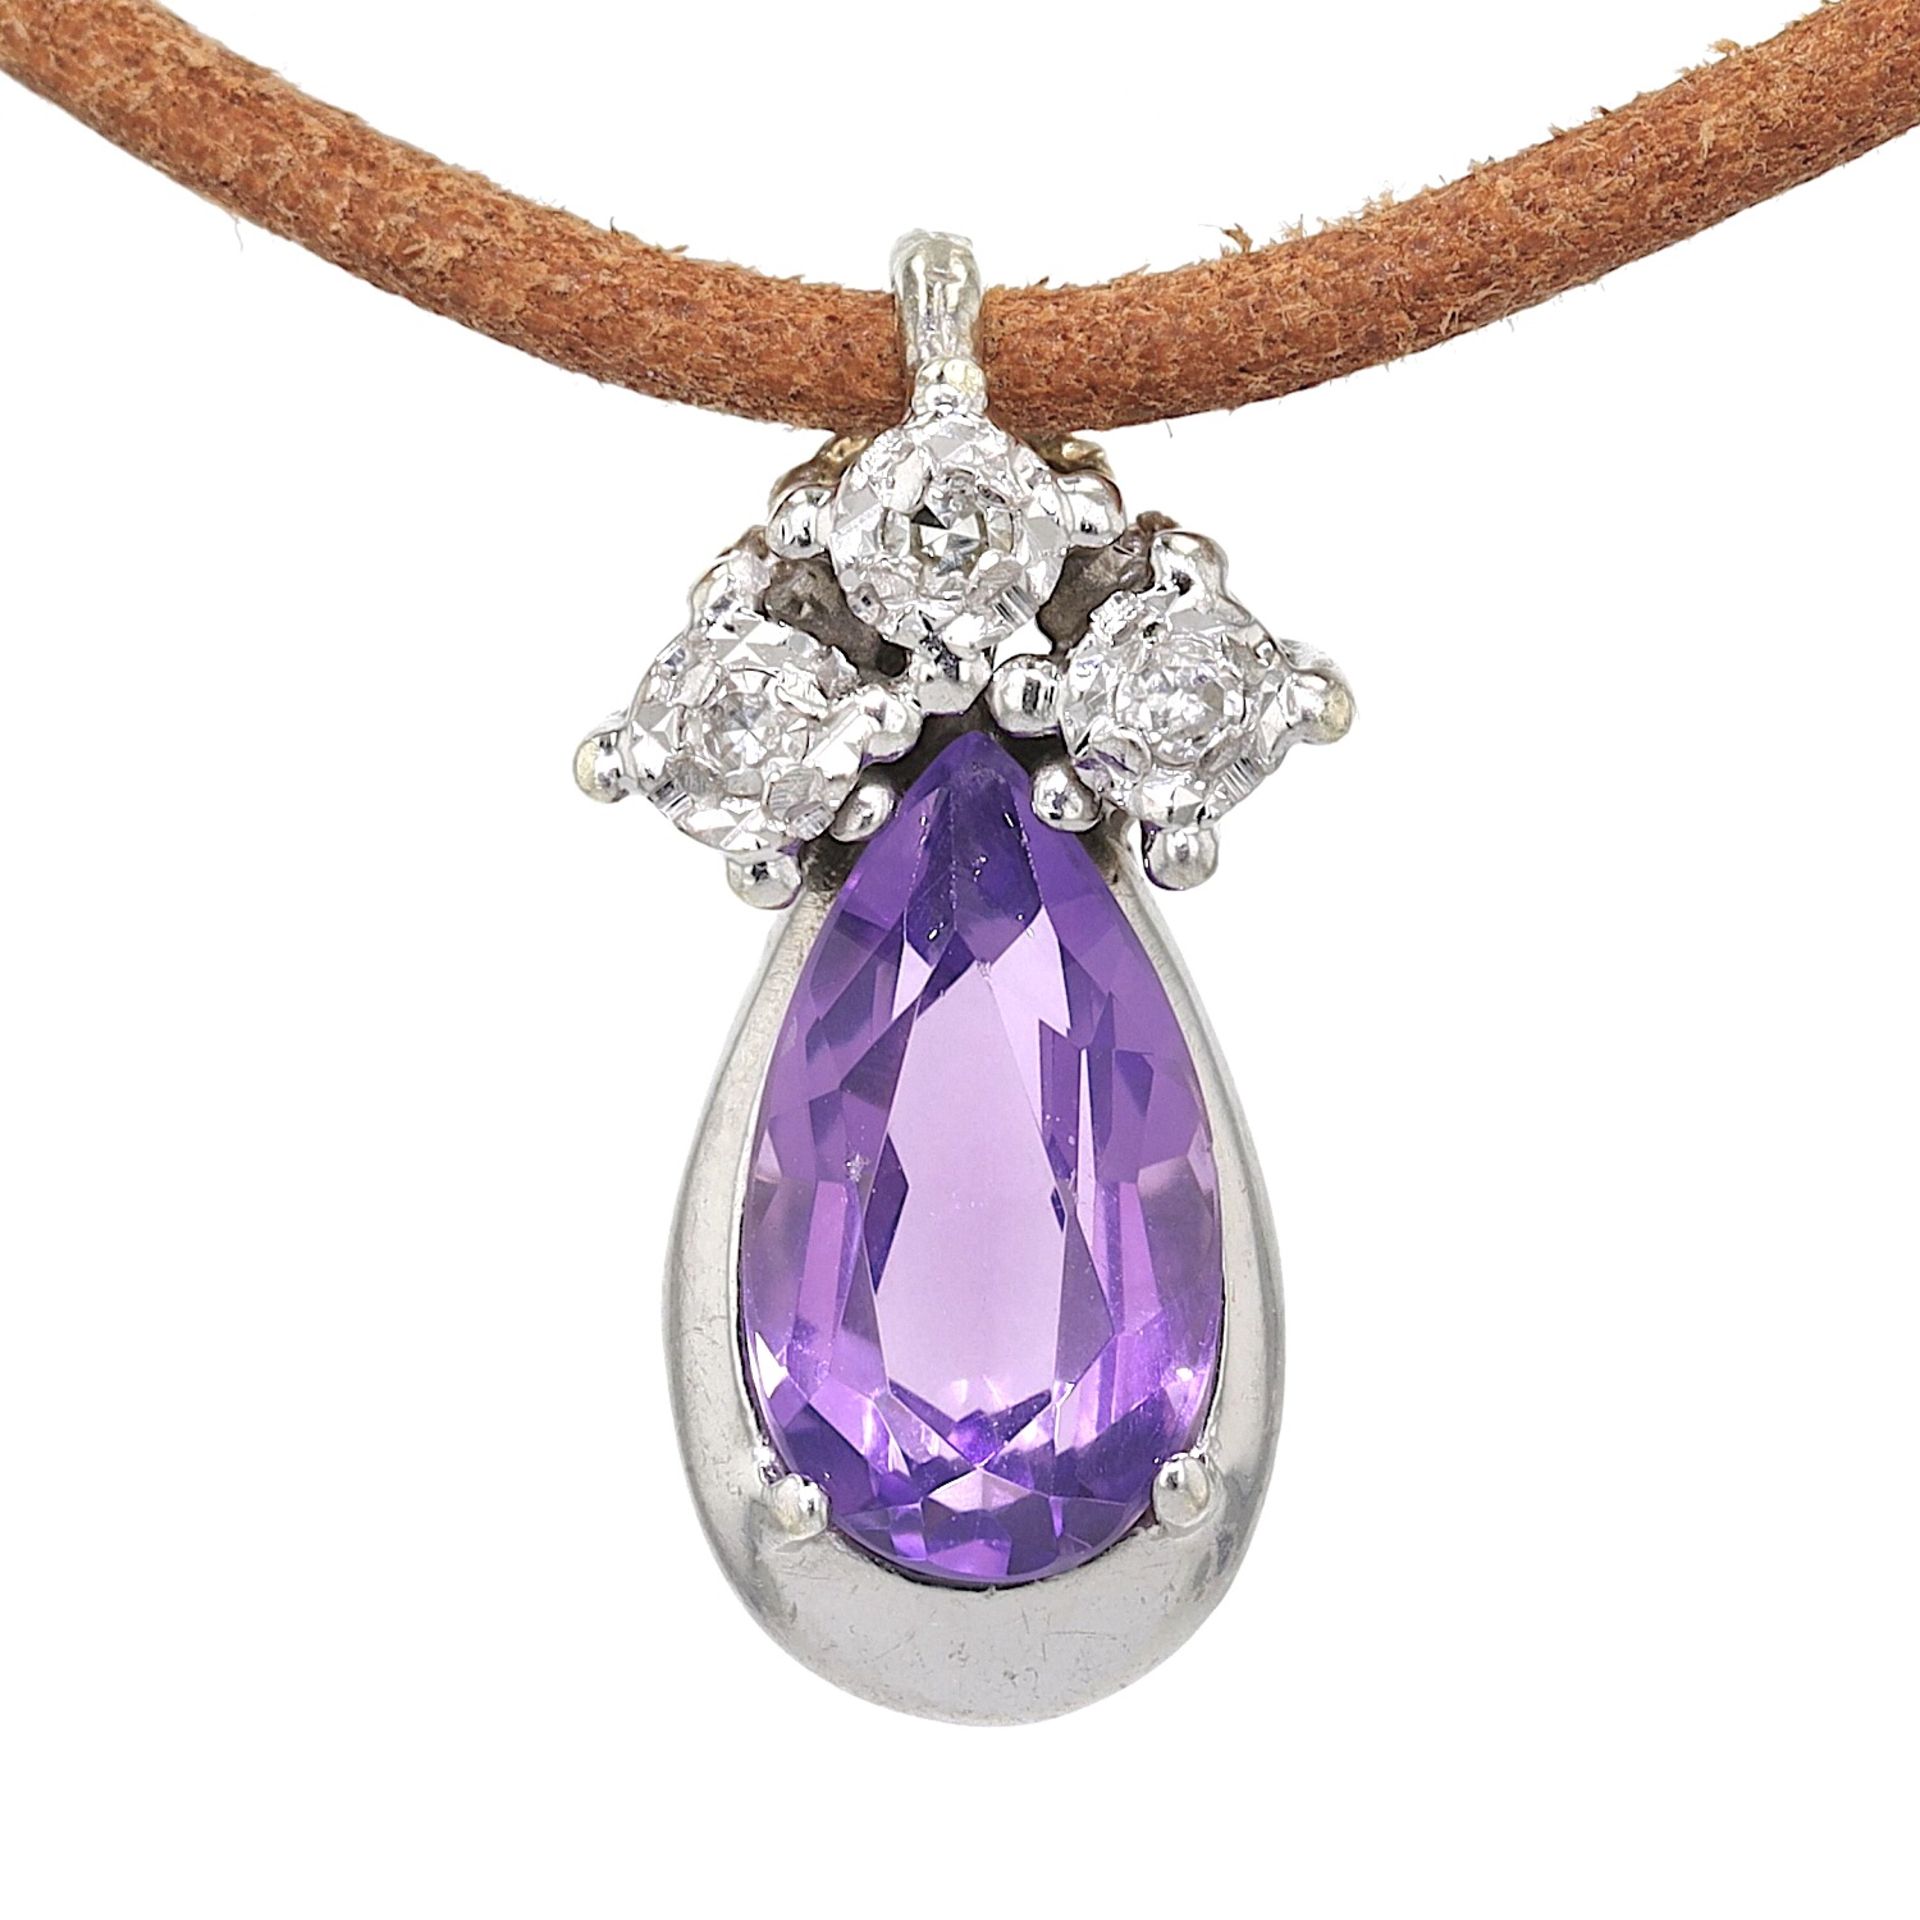 Pendant with amethyst and diamonds